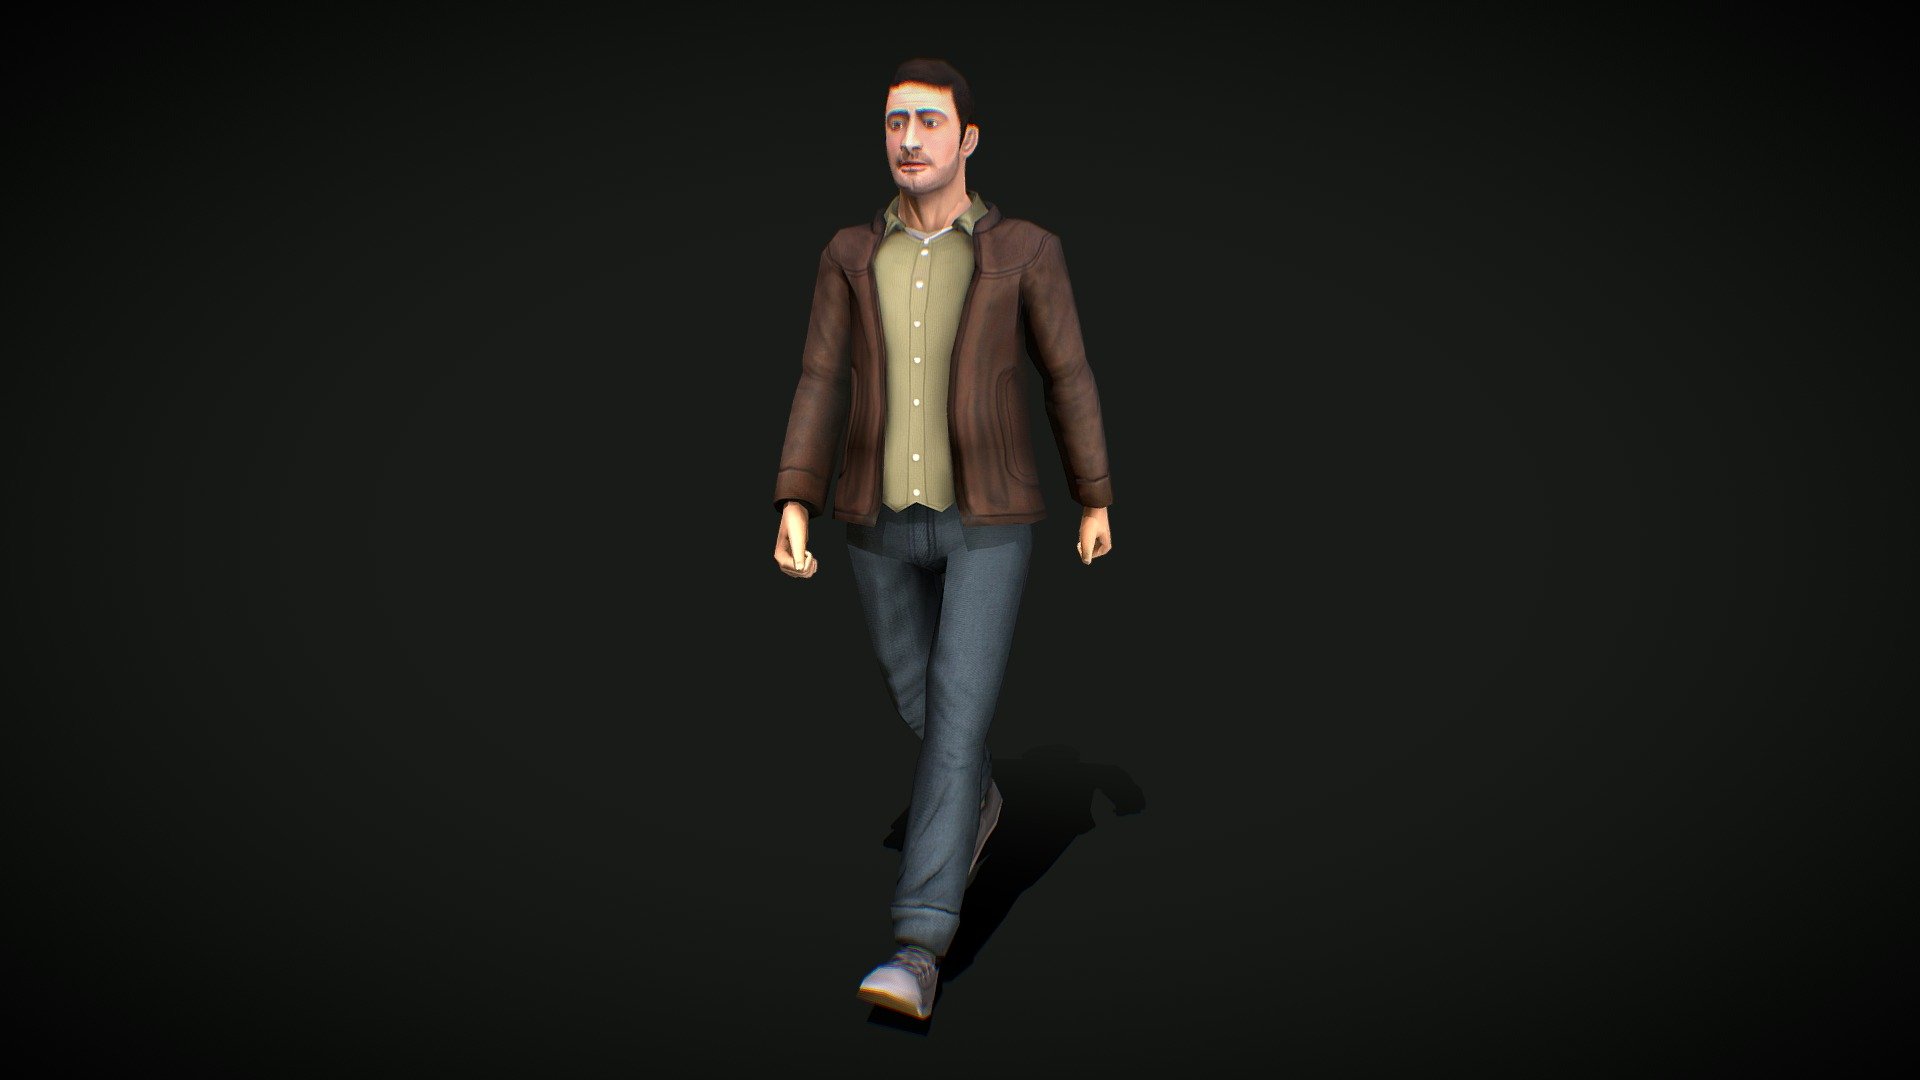 An ideal character for architectural visualizations or mobile games, very low polygon geometry. The Model has animations … The 3D rigging is compatible with Unity Engine’s Mecanim but can work with other game engines. (tested on Unreal, Godot, Unity)

NEW




Fixed axes

Remade animations

TODO




limit weights to a maximum of 4 bones.

Test compatibility with Three.js and Babylon.js

This is free for you. If you downloaded this file and liked it, please consider pressing the star button.

Follow me! More free stuff to come soon 3d model